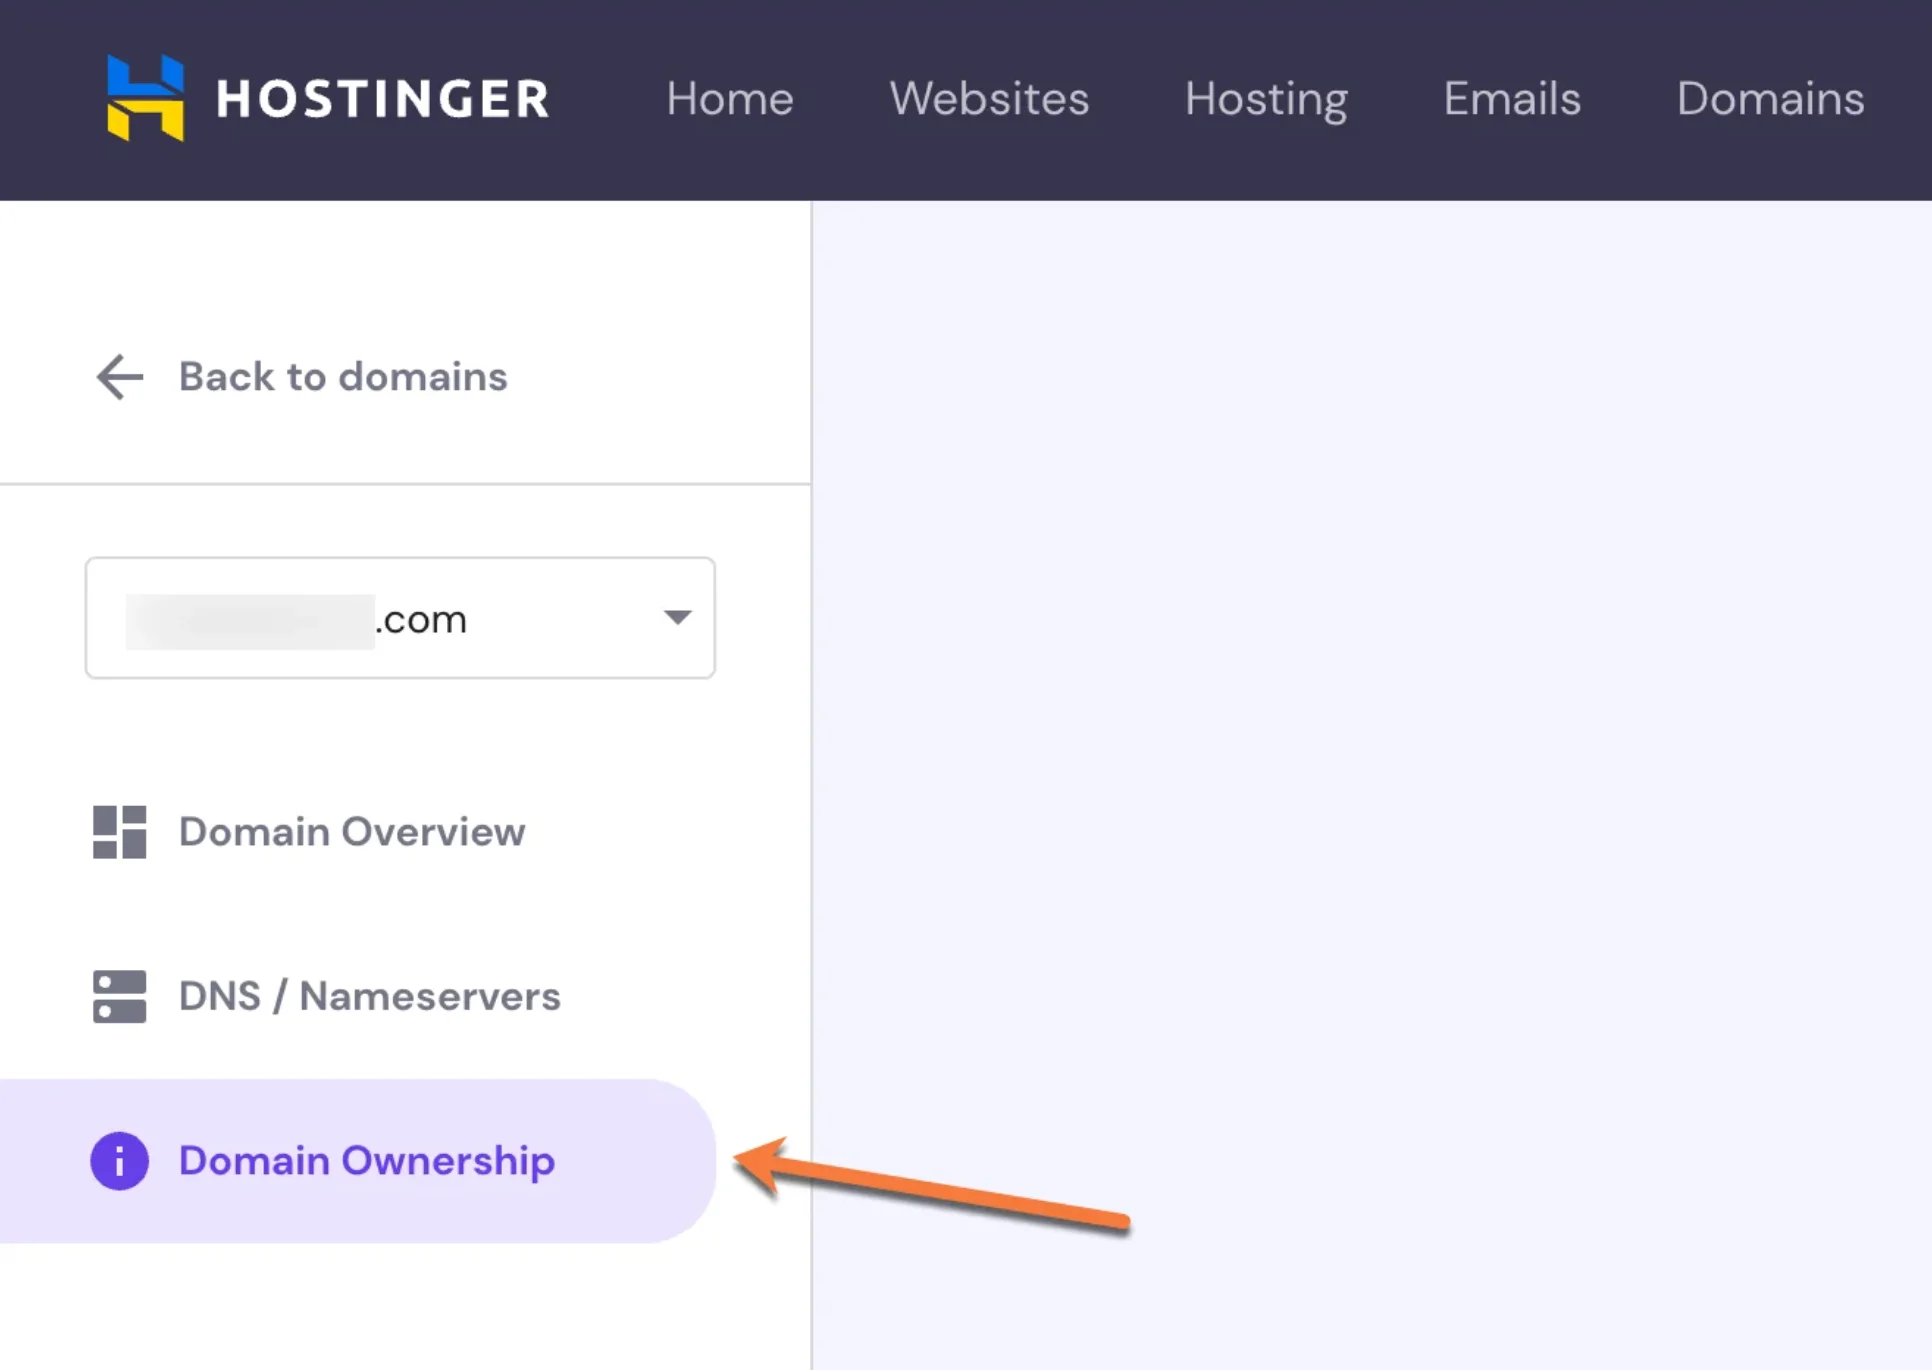 Hostinger dashboard with red arrows pointing to Domain Ownership tab